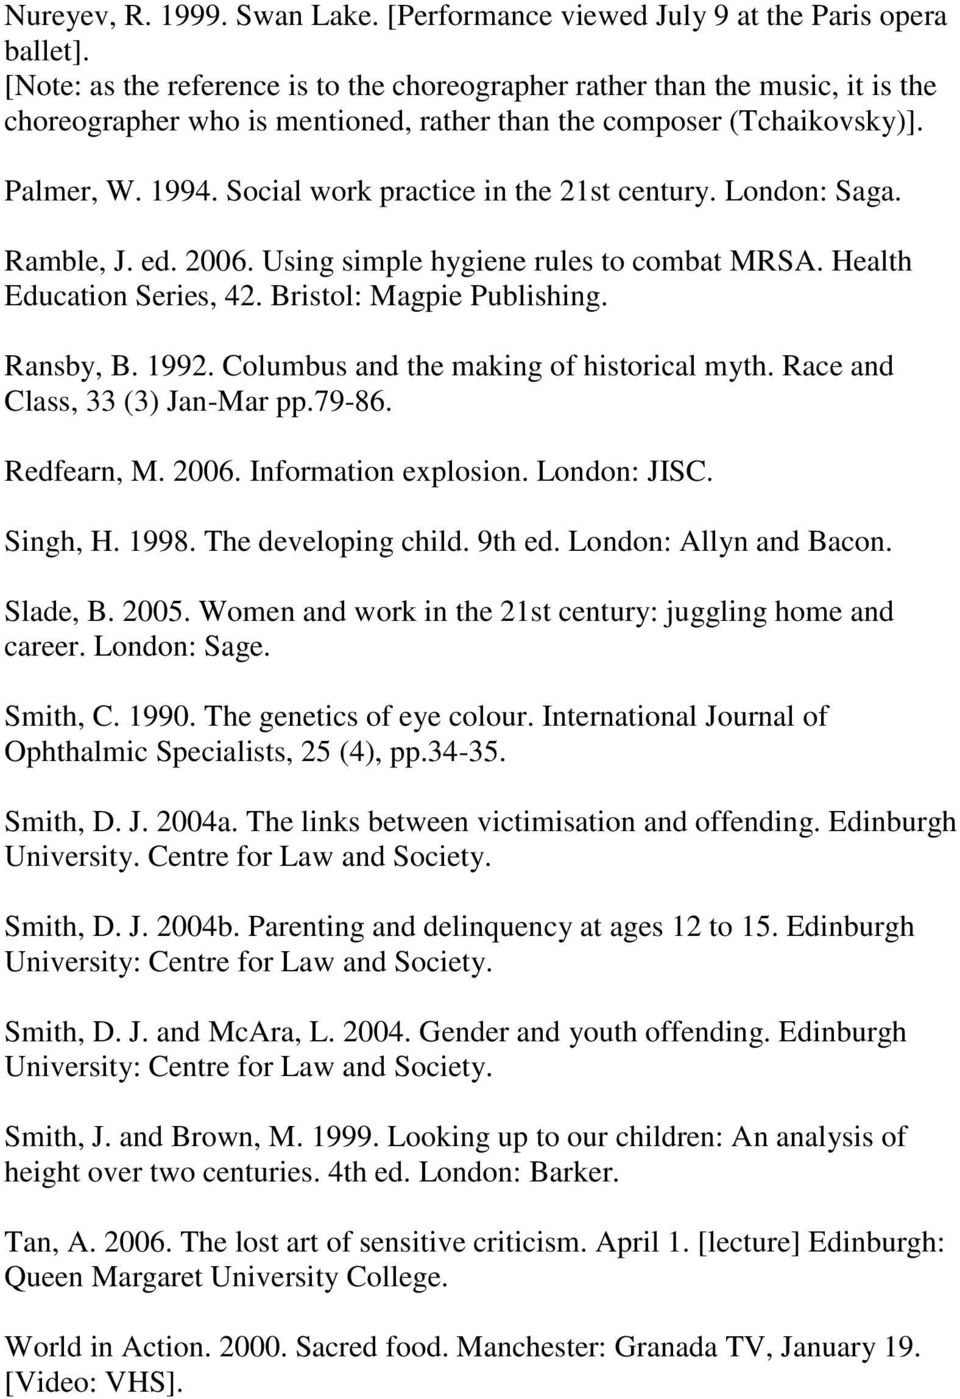 Social work practice in the 21st century. London: Saga. Ramble, J. ed. 2006. Using simple hygiene rules to combat MRSA. Health Education Series, 42. Bristol: Magpie Publishing. Ransby, B. 1992.